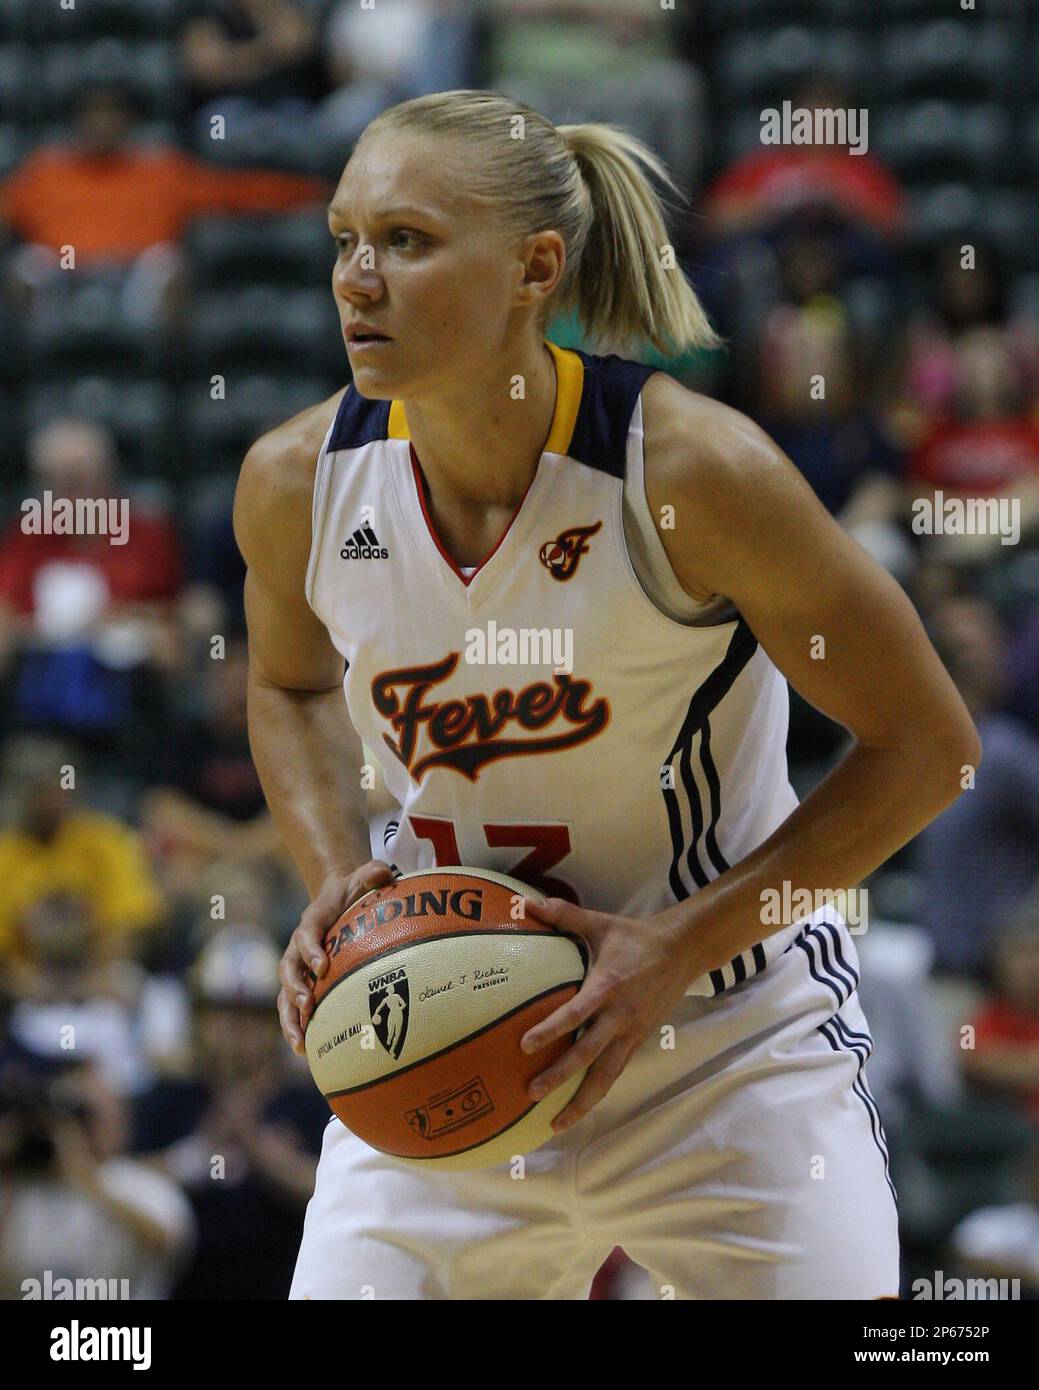 August 28 2012: Indiana Fever guard Erin Phillips (13) sets up the offense during a game between the Washington Mystics and the Indiana Fever at Bankers Life Fieldhouse in Indianapolis, Indiana. (Cal Sport Media via AP Images) Foto Stock